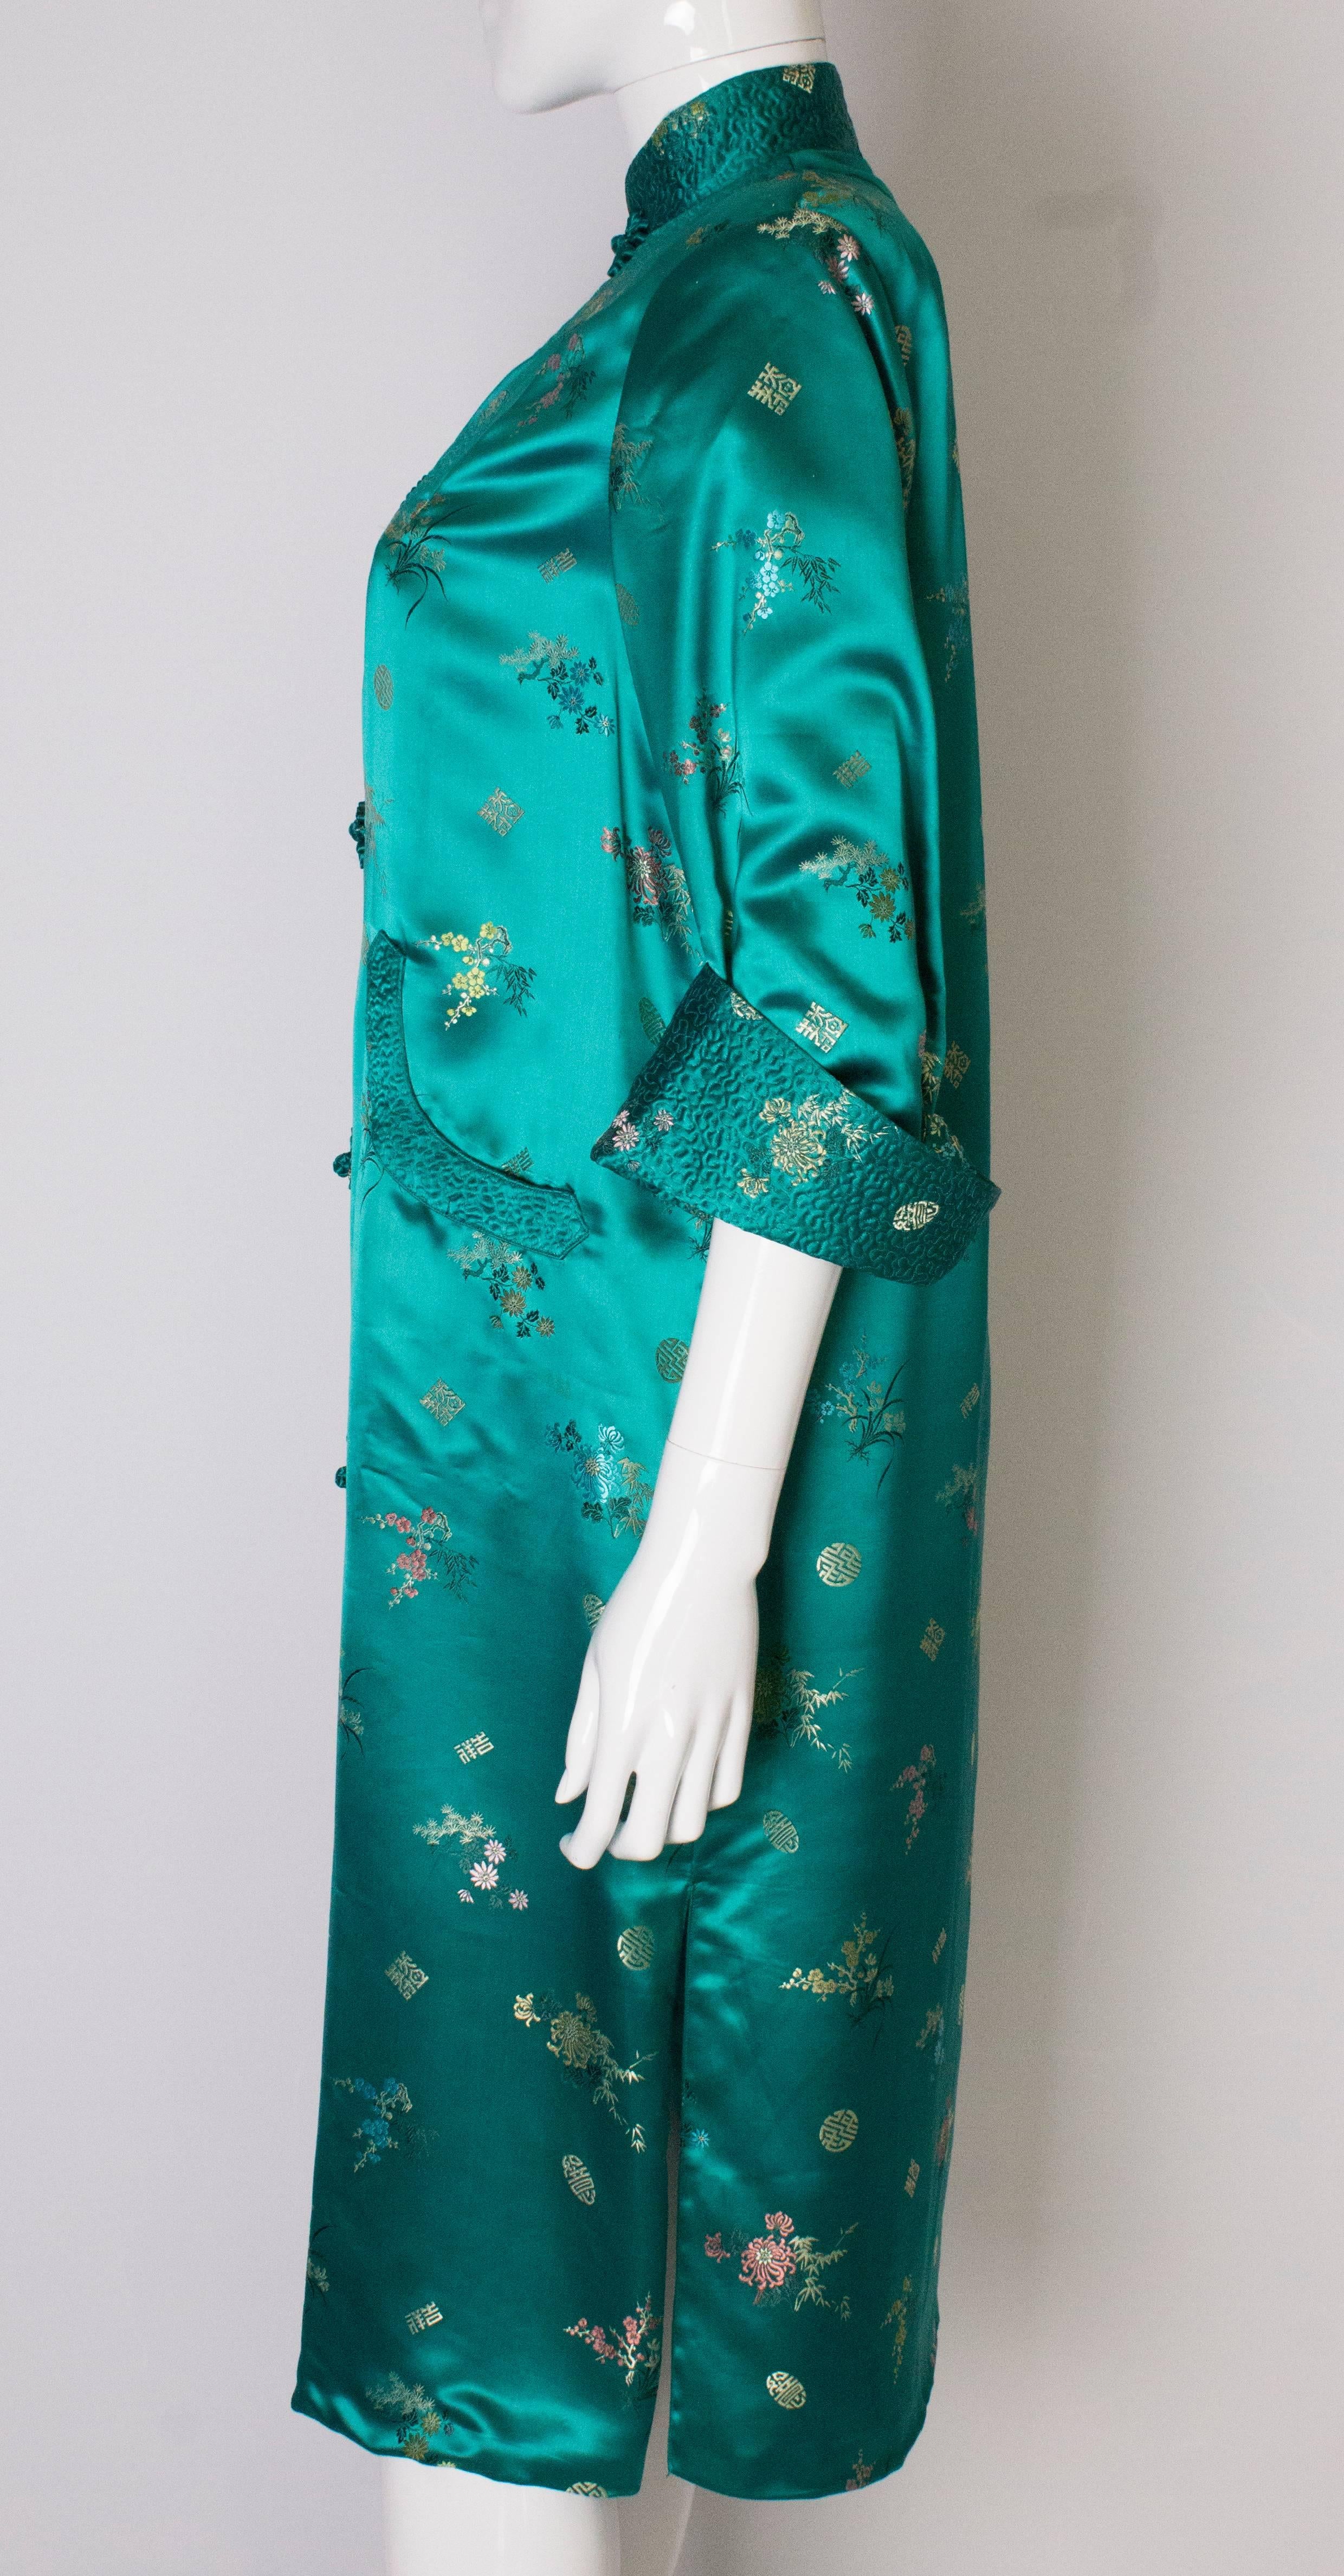 A Vintage 1970s Turquoise Chinese Coat with Stand-up Collar & Decorative Pockets 1